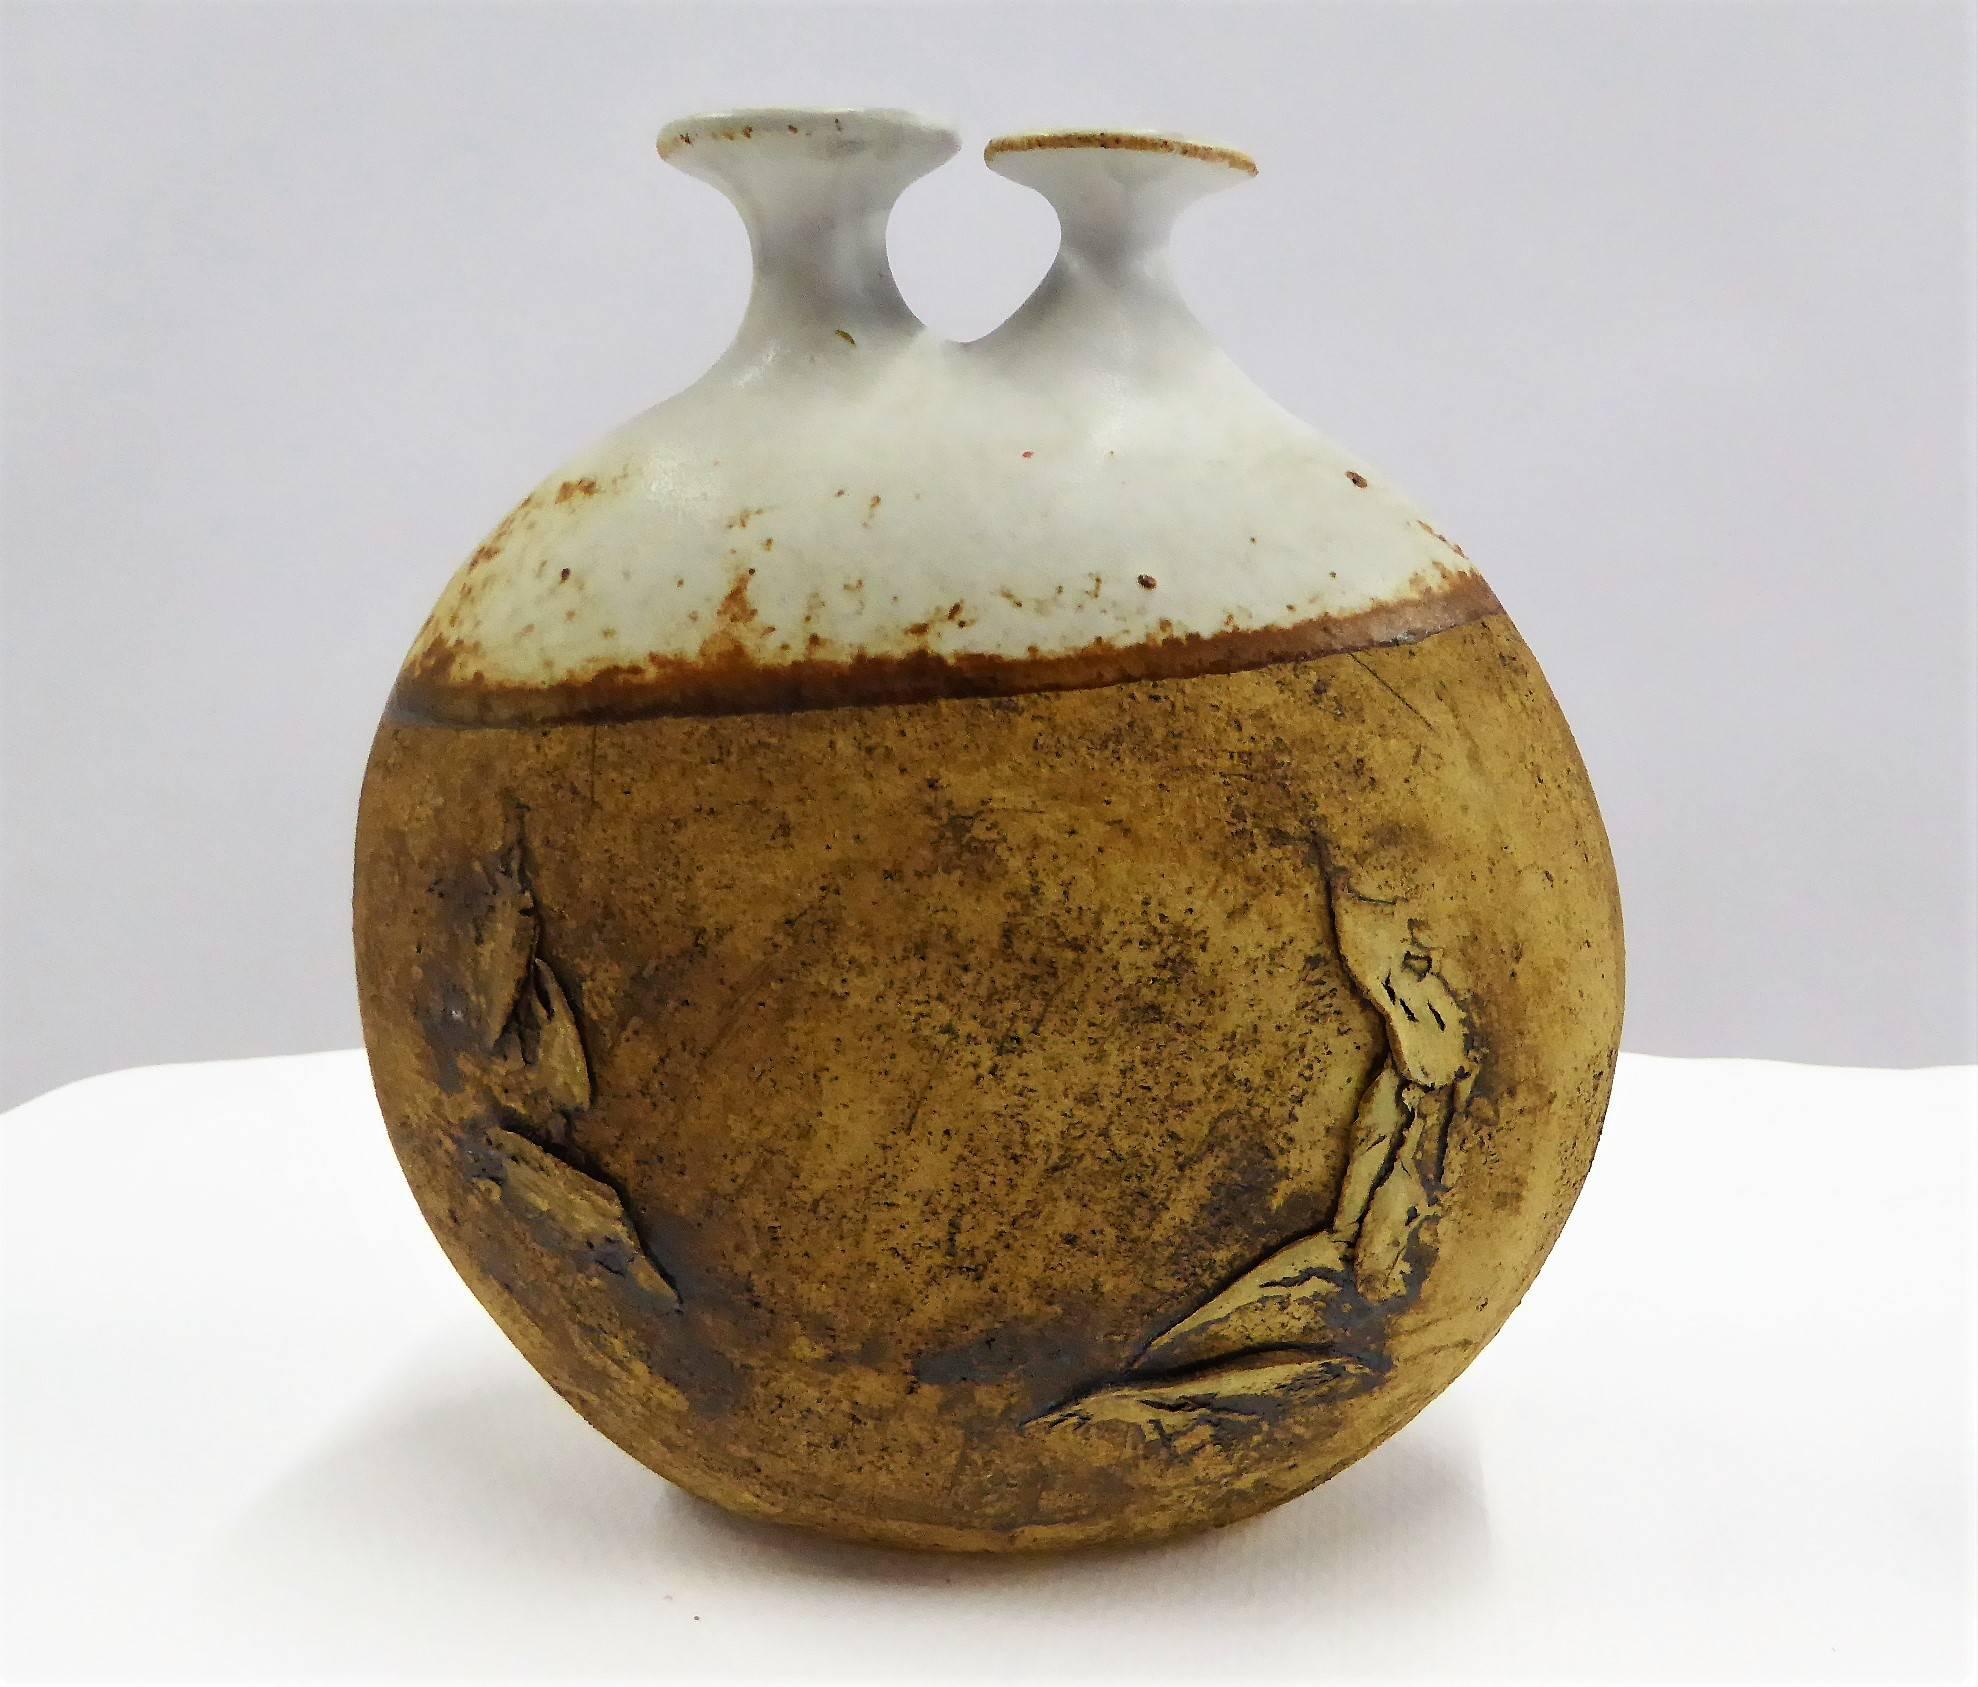 REDUCED FROM $475.....1960s art pottery vessel by Warren Hullow of Hickory Grove Studios. Fairly rare, it is a wide stoneware weed pot or twig vase with unglazed lower half and the upper glazed with a pair of spouts. Well known, he collaborated with